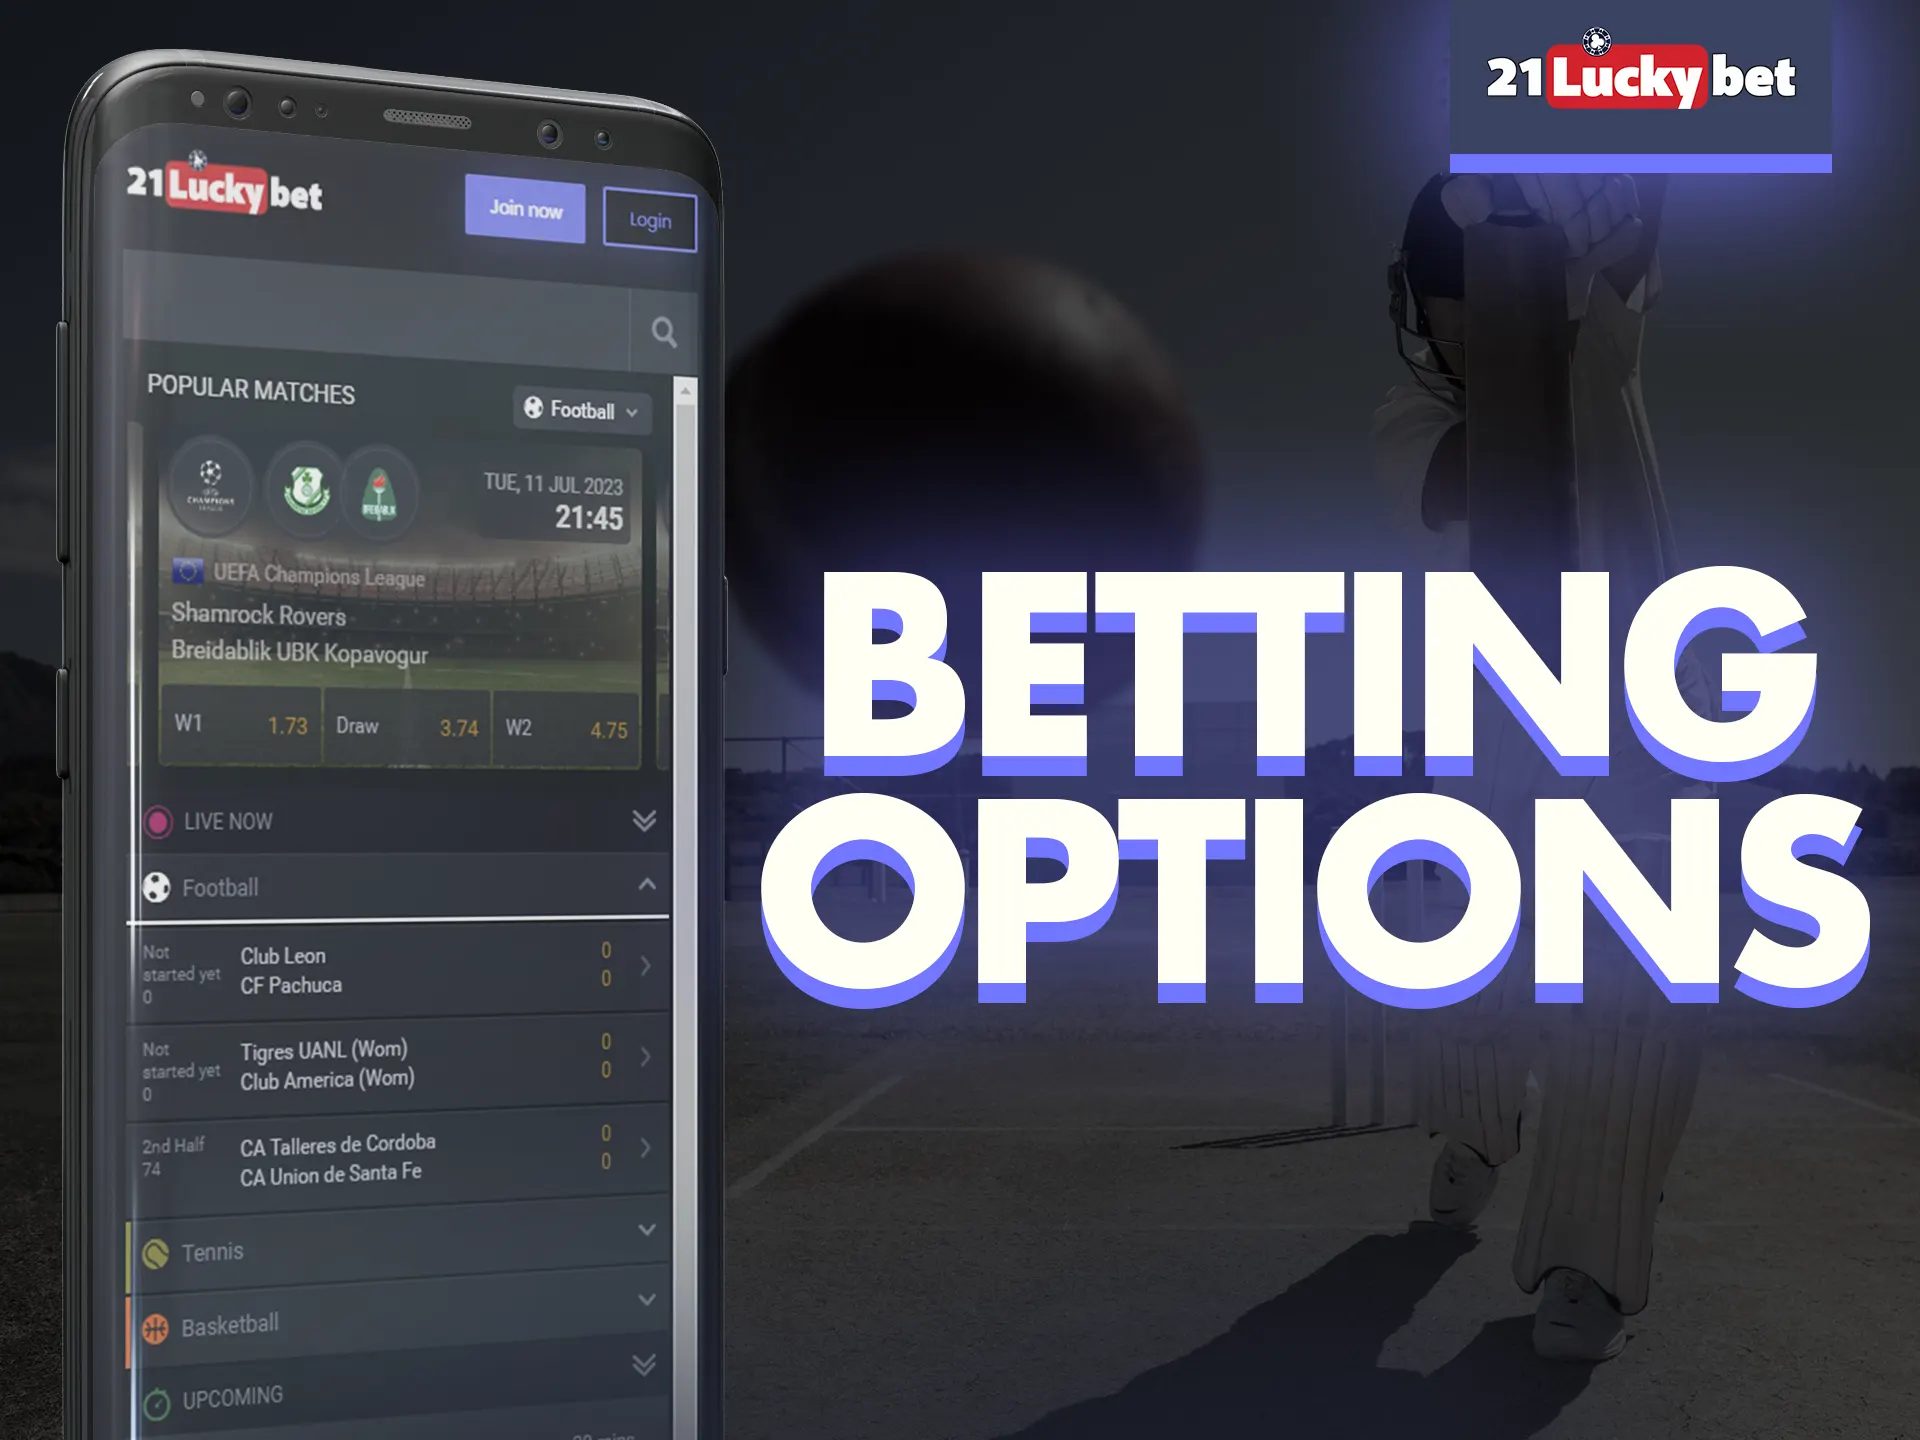 In 21luckybet app try different betting options.